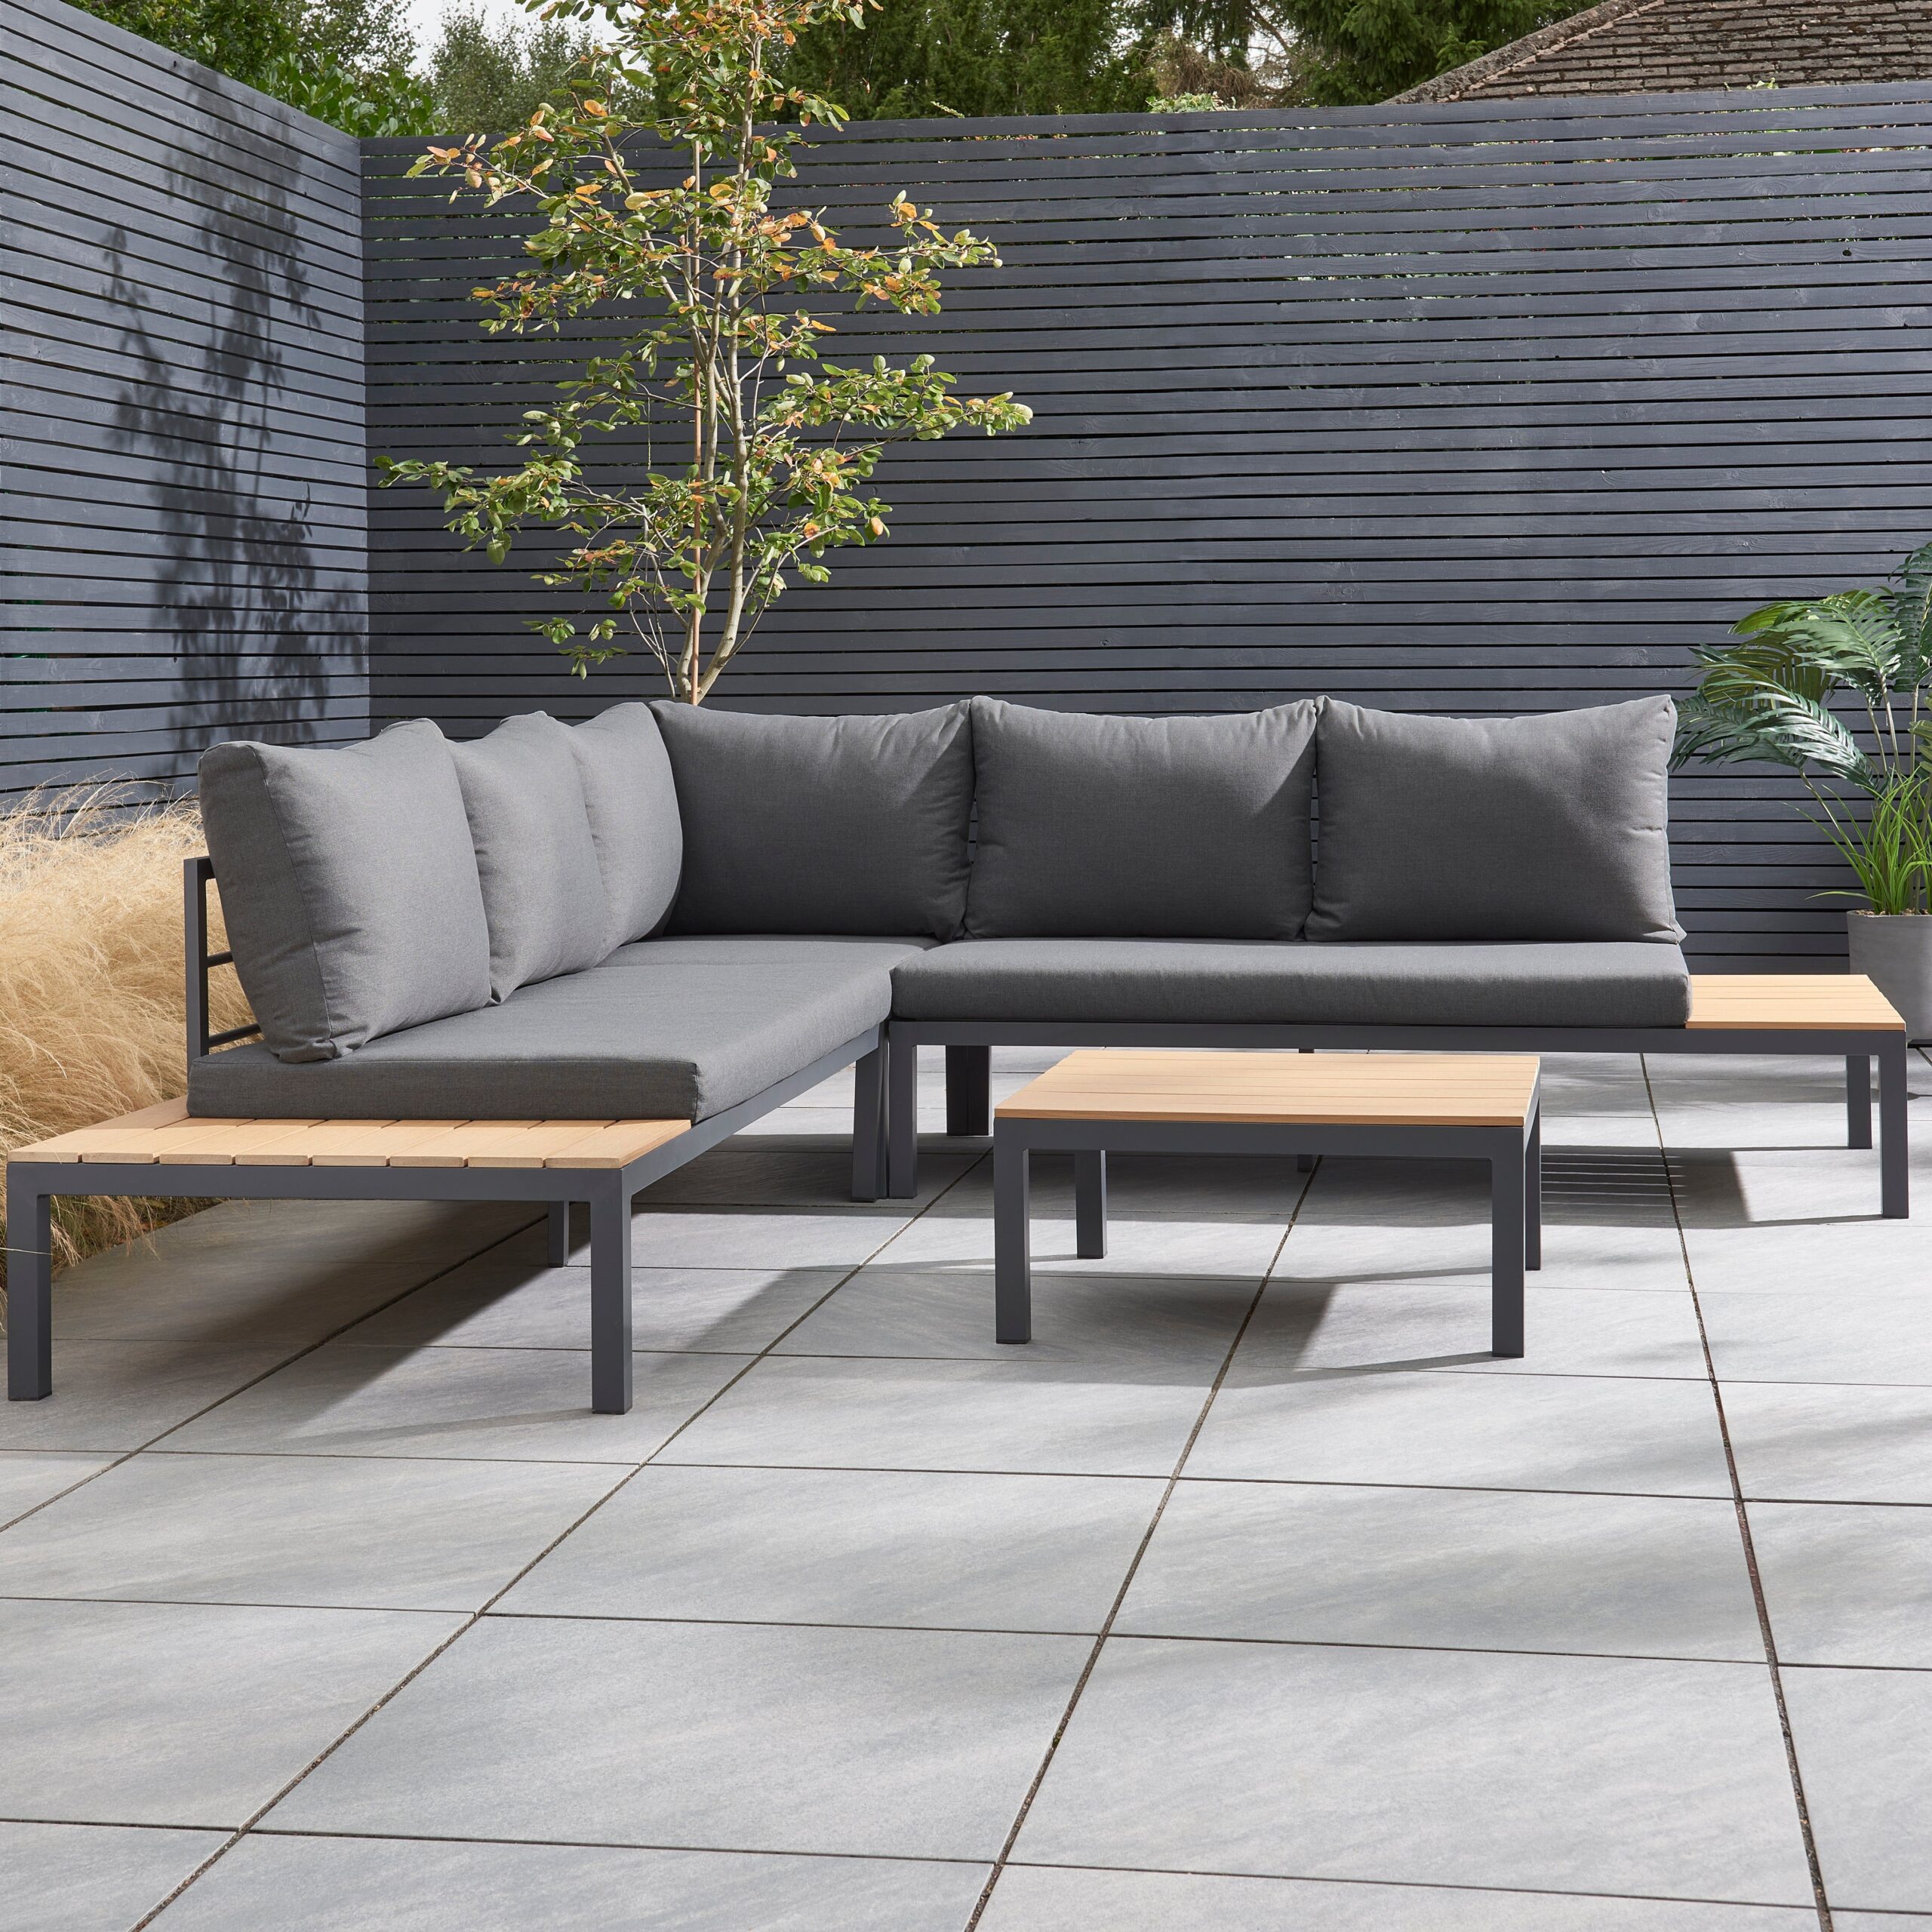 The Evolution of Contemporary Outdoor Furniture Collections